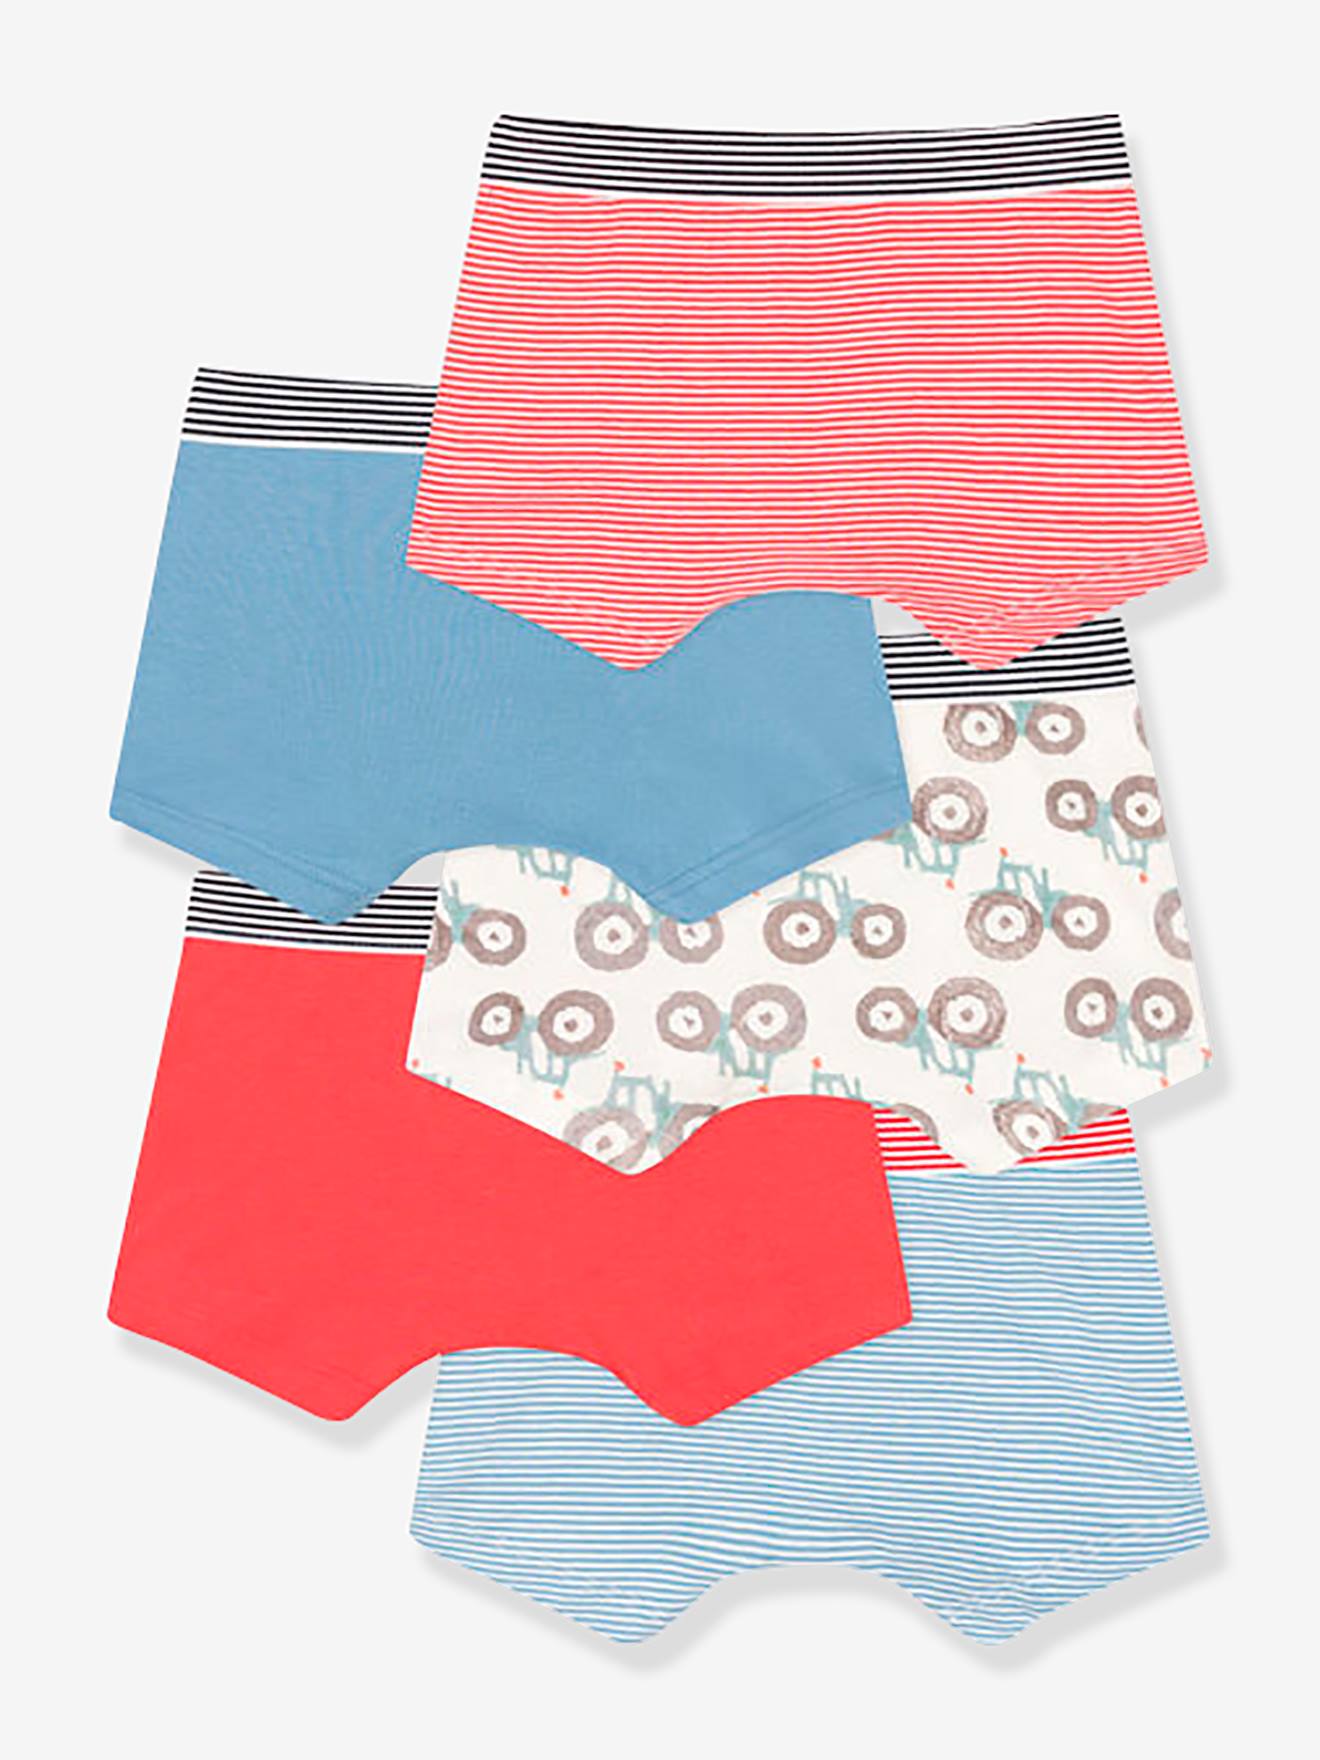 Pack of 5 Tractor Boxers in Cotton for Young Boys, PETIT BATEAU